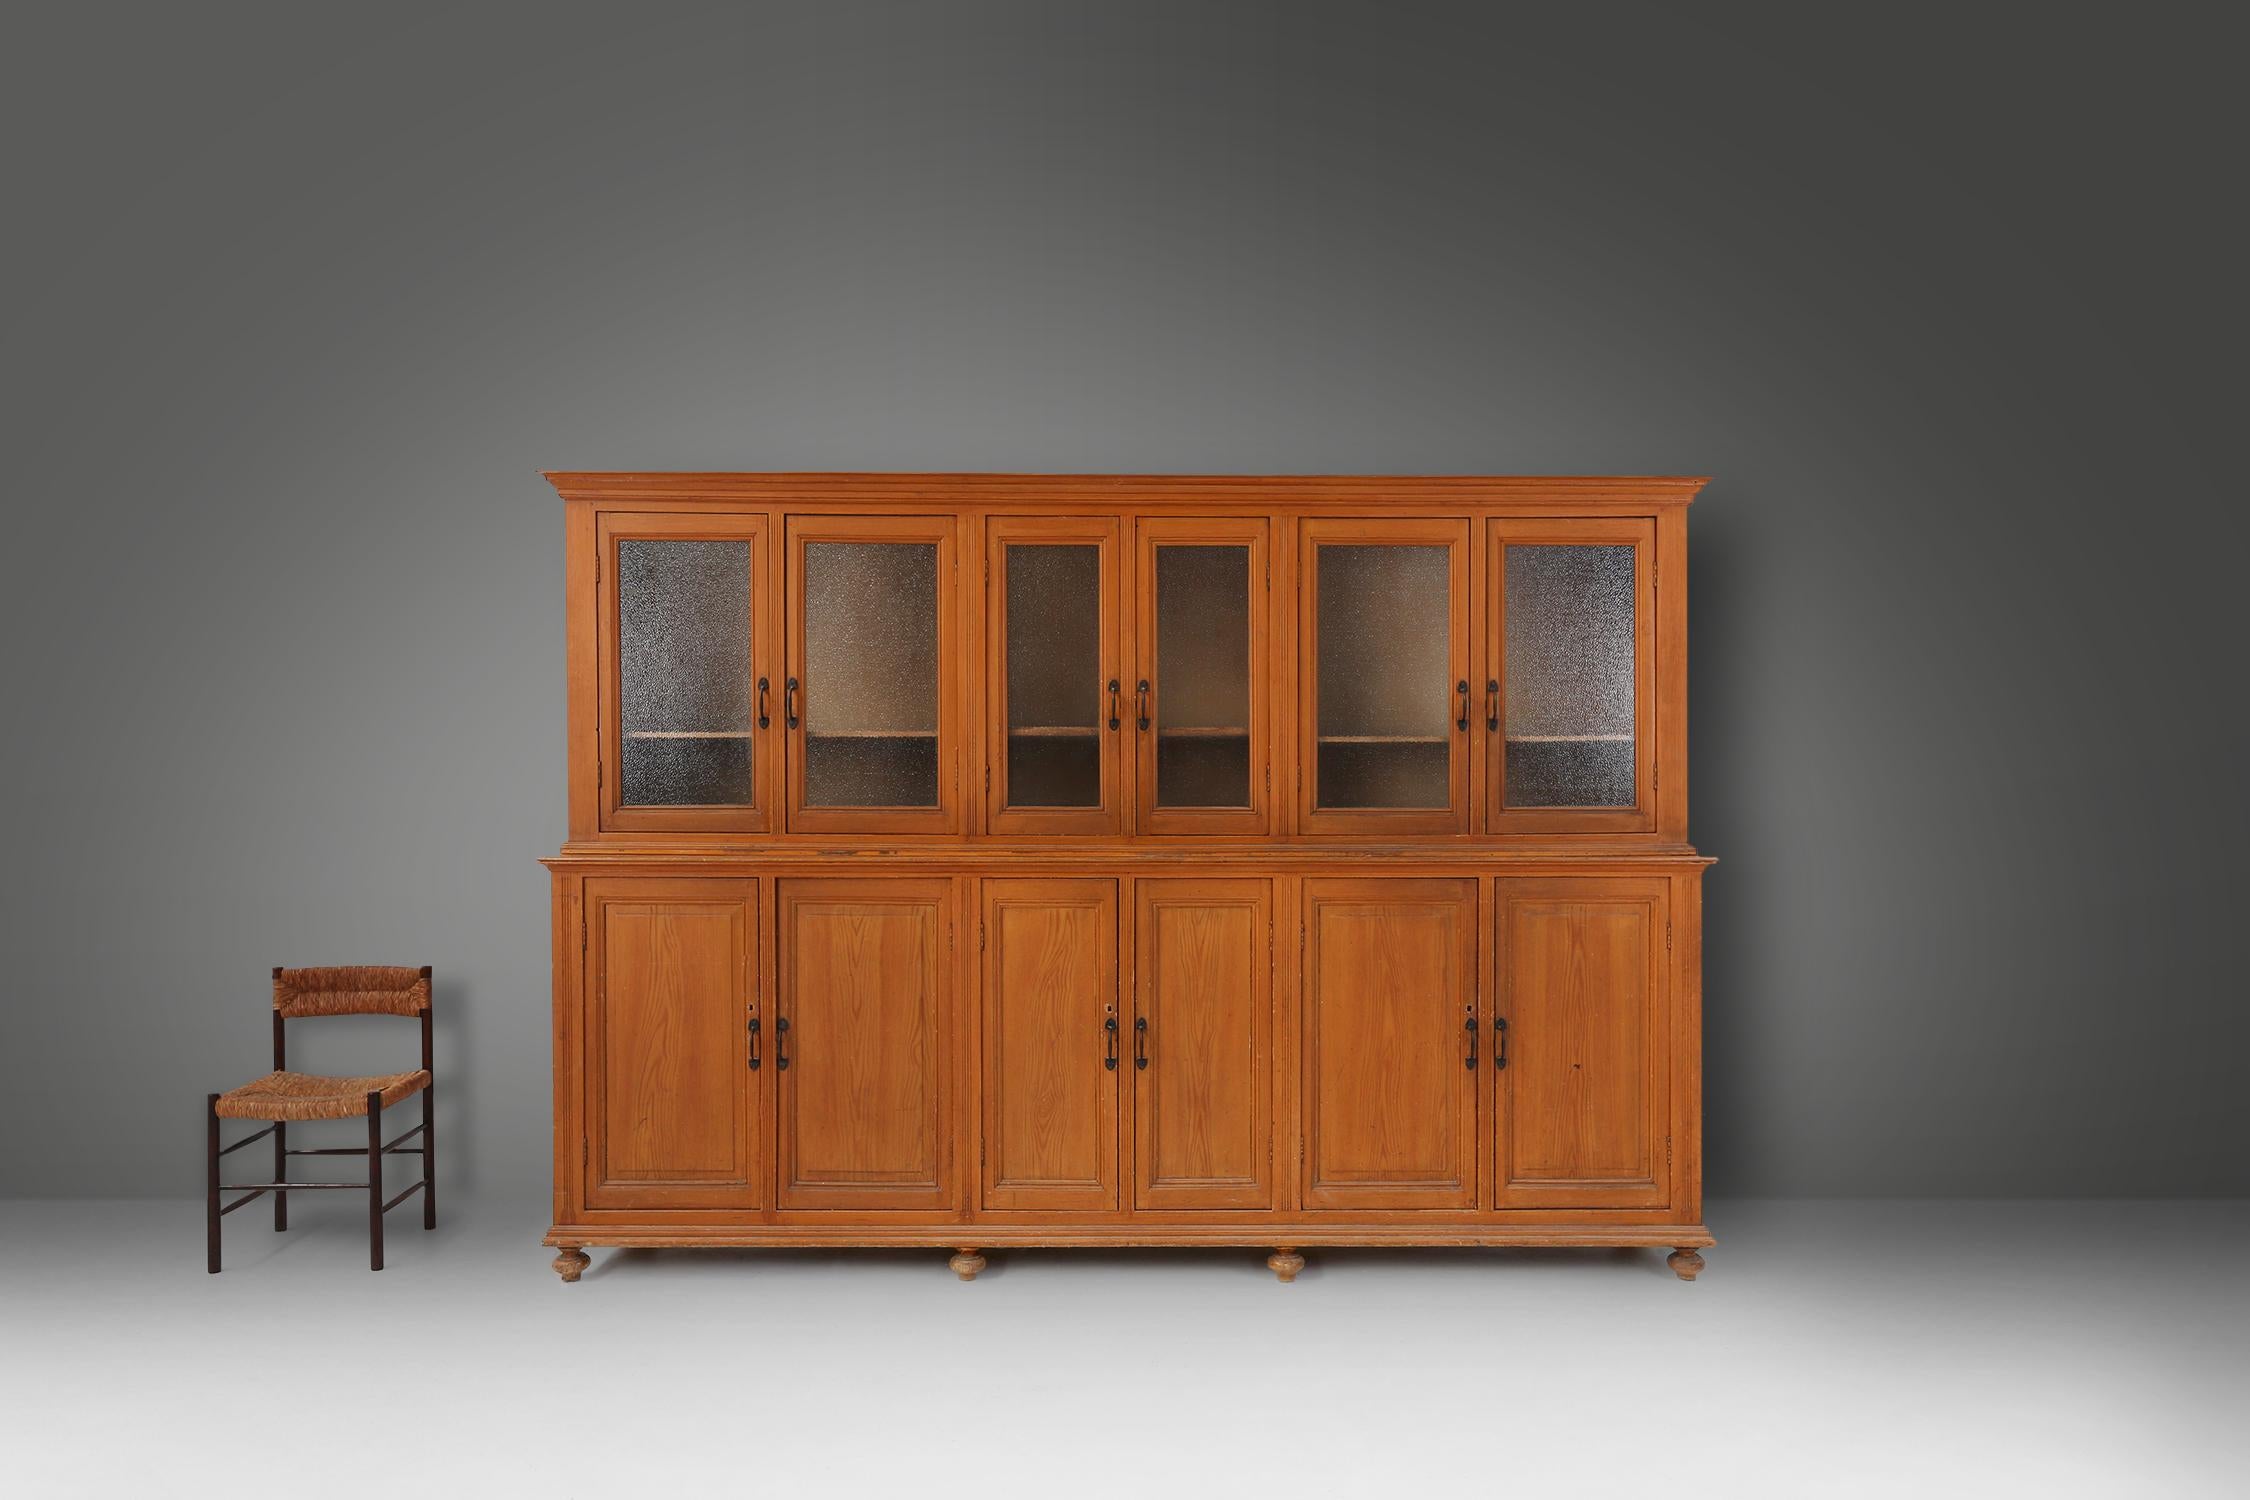 Belgium / 1890 / monastery cabinet / pine wood, figured glass / antique / mid-century / rustic

An impressive Belgium monastery or display cabinet in pine with 6 wood doors on the bottom and 6 figured glass doors on top. With 6 large compartments